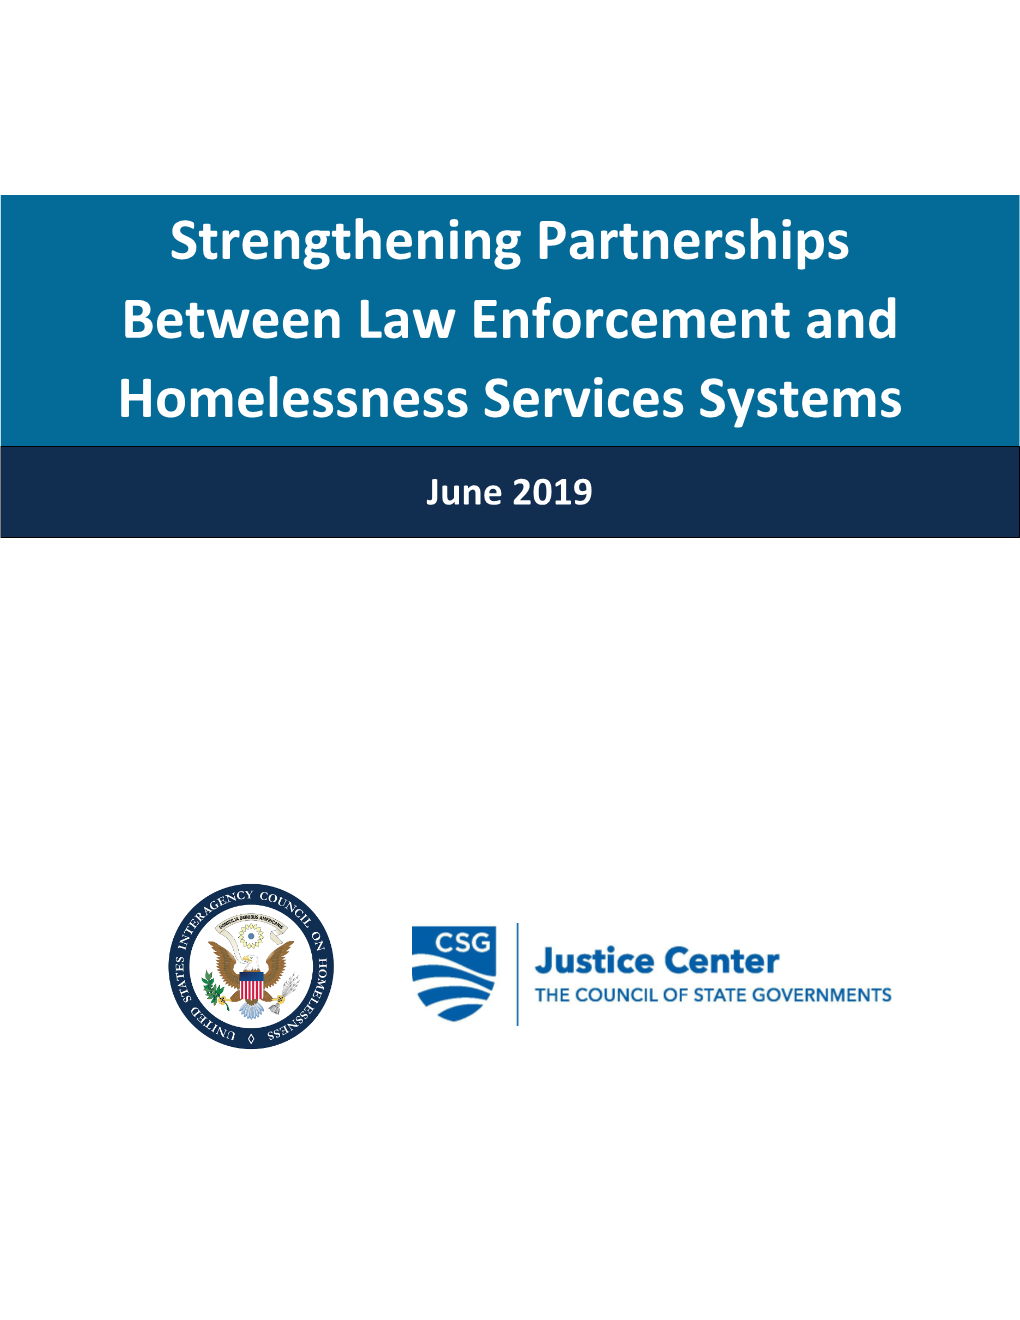 Strengthening Partnerships Between Law Enforcement and Homelessness Services Systems